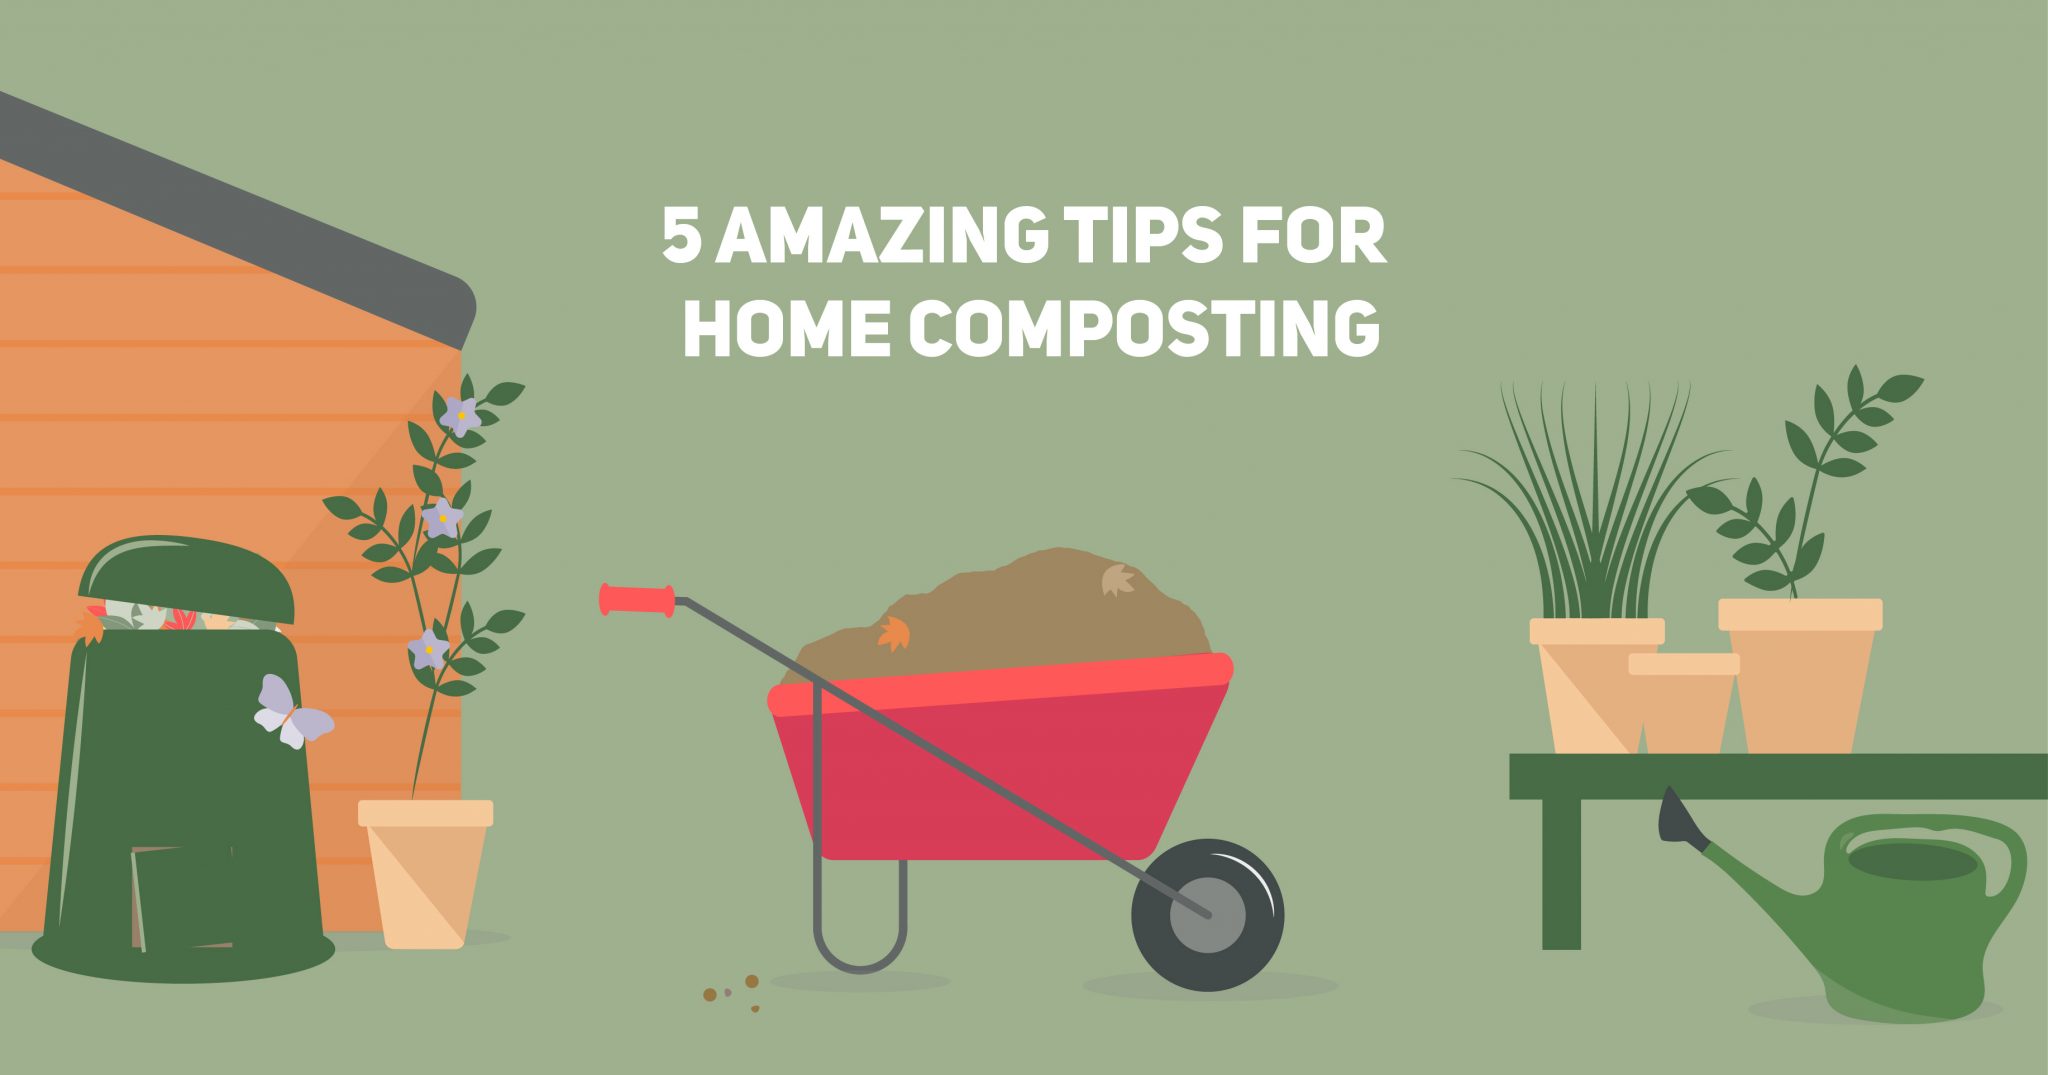 Vegware US's 5 amazing tips for home composting